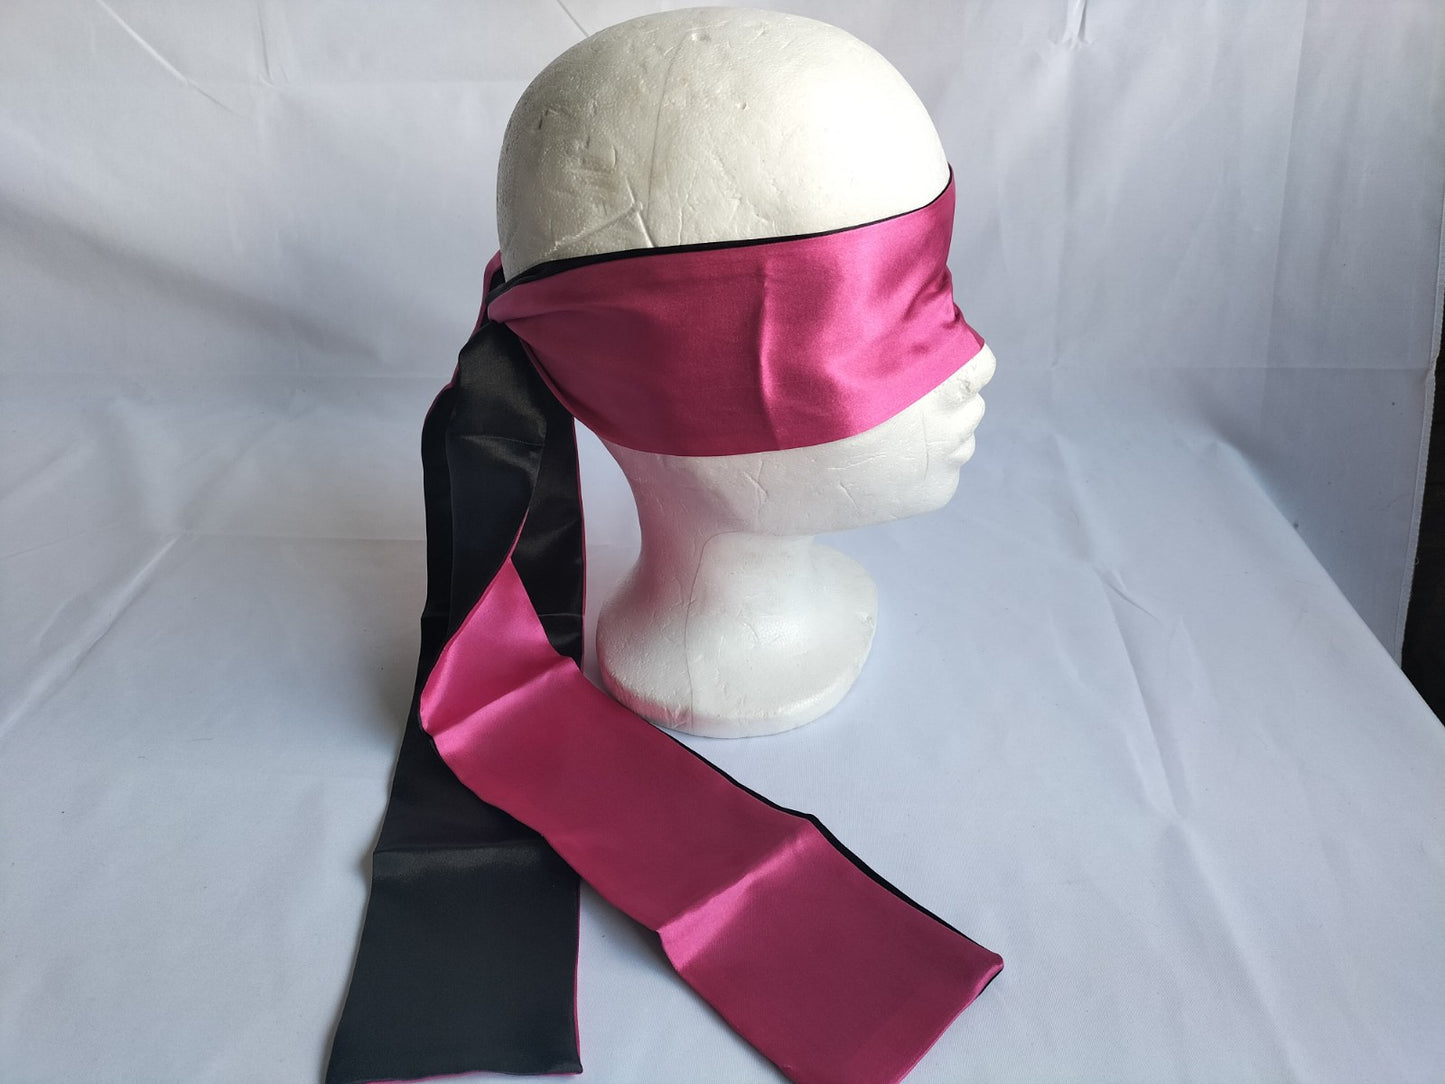 Black nappa leather eye mask with lace-up closure